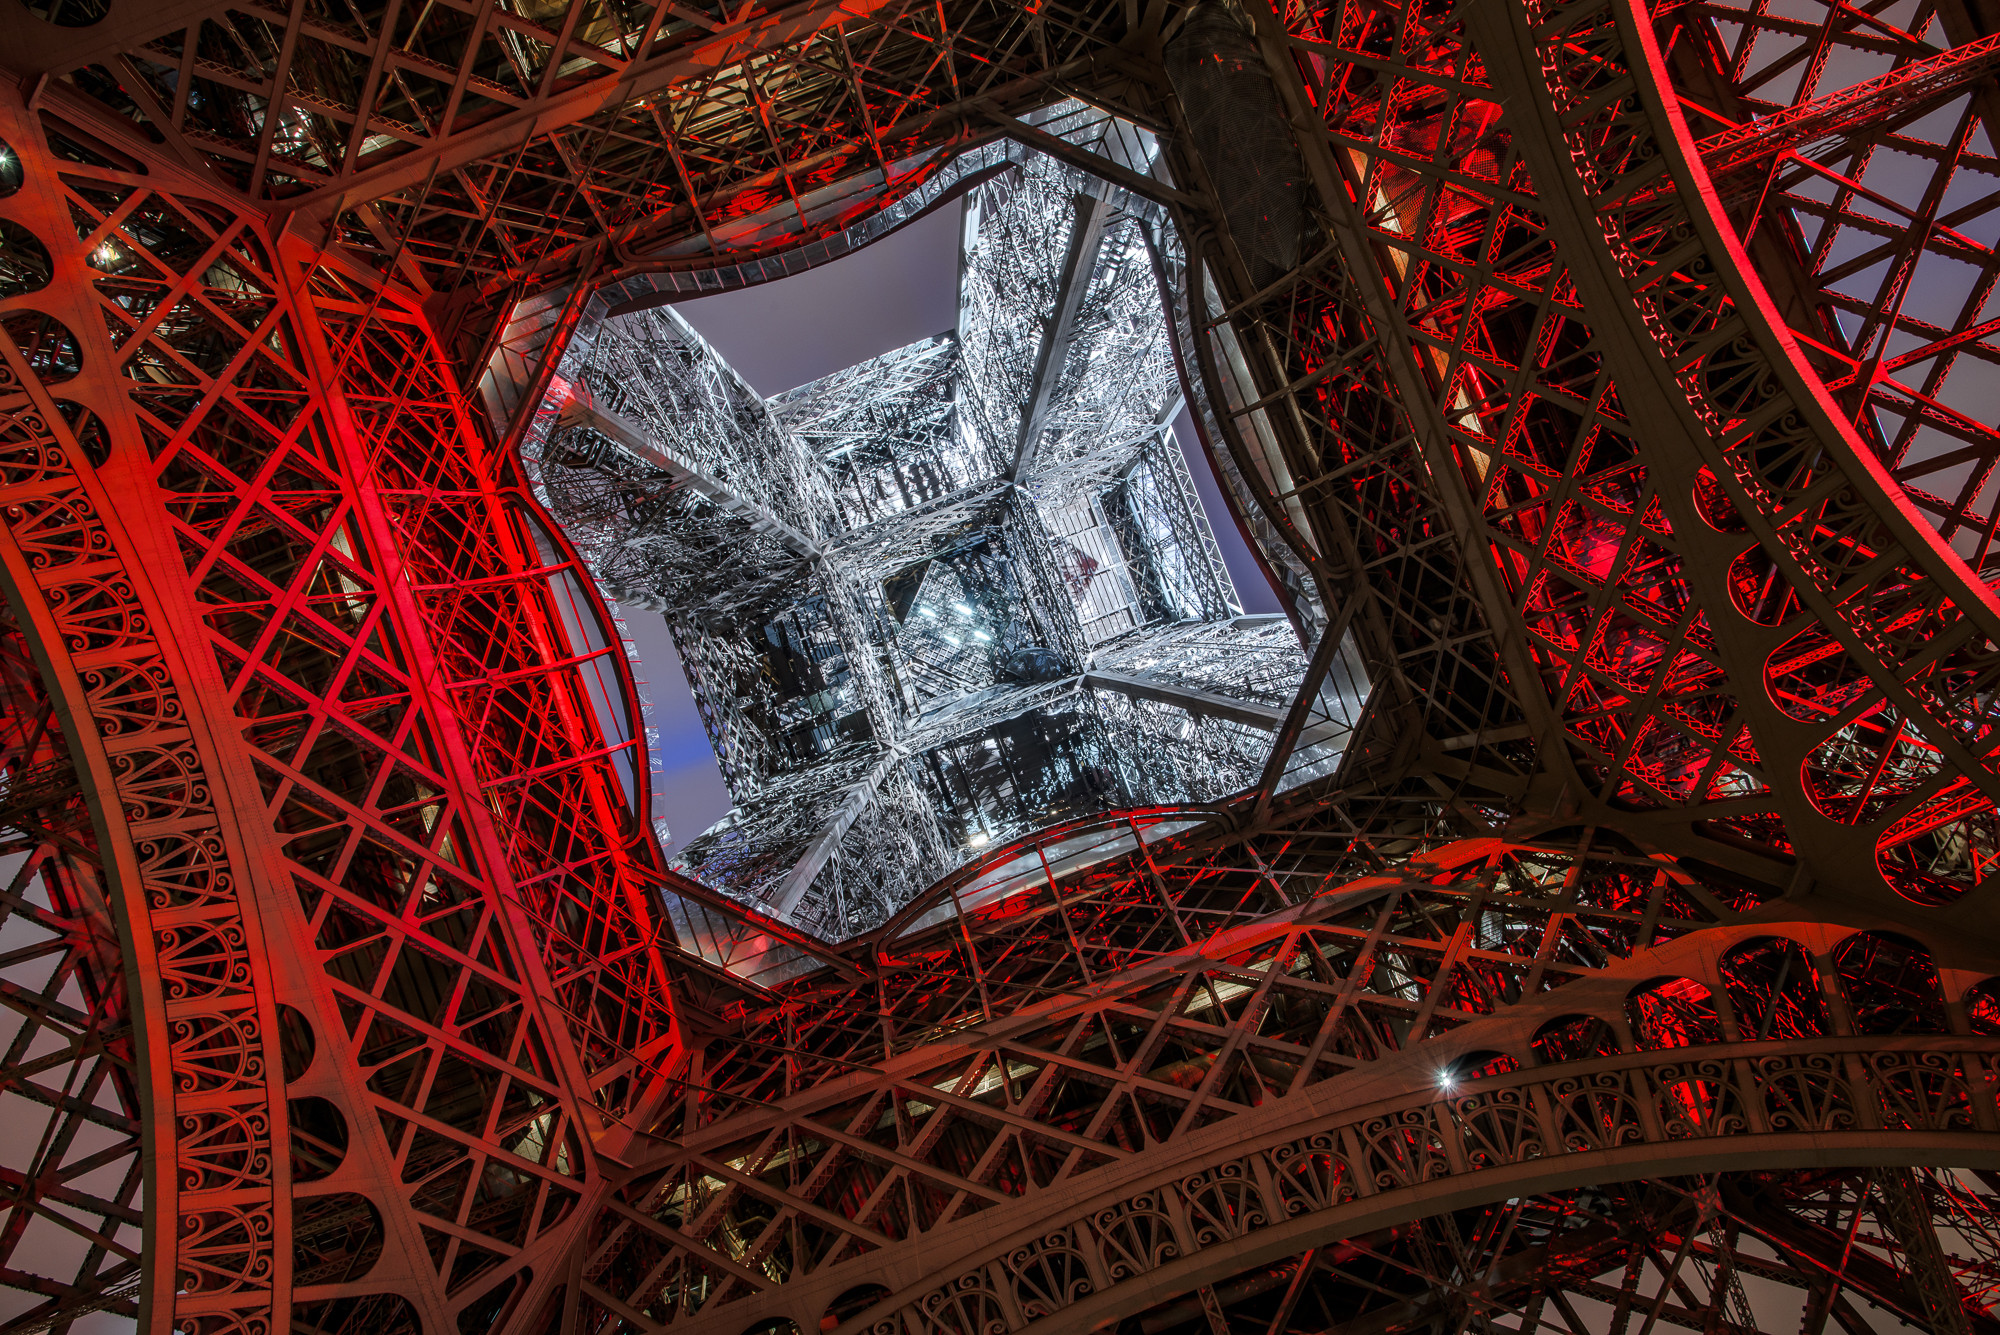 Architecture Tower Eiffel Tower Paris France Worms Eye View Metal Construction Night Red Light Red B 2000x1335